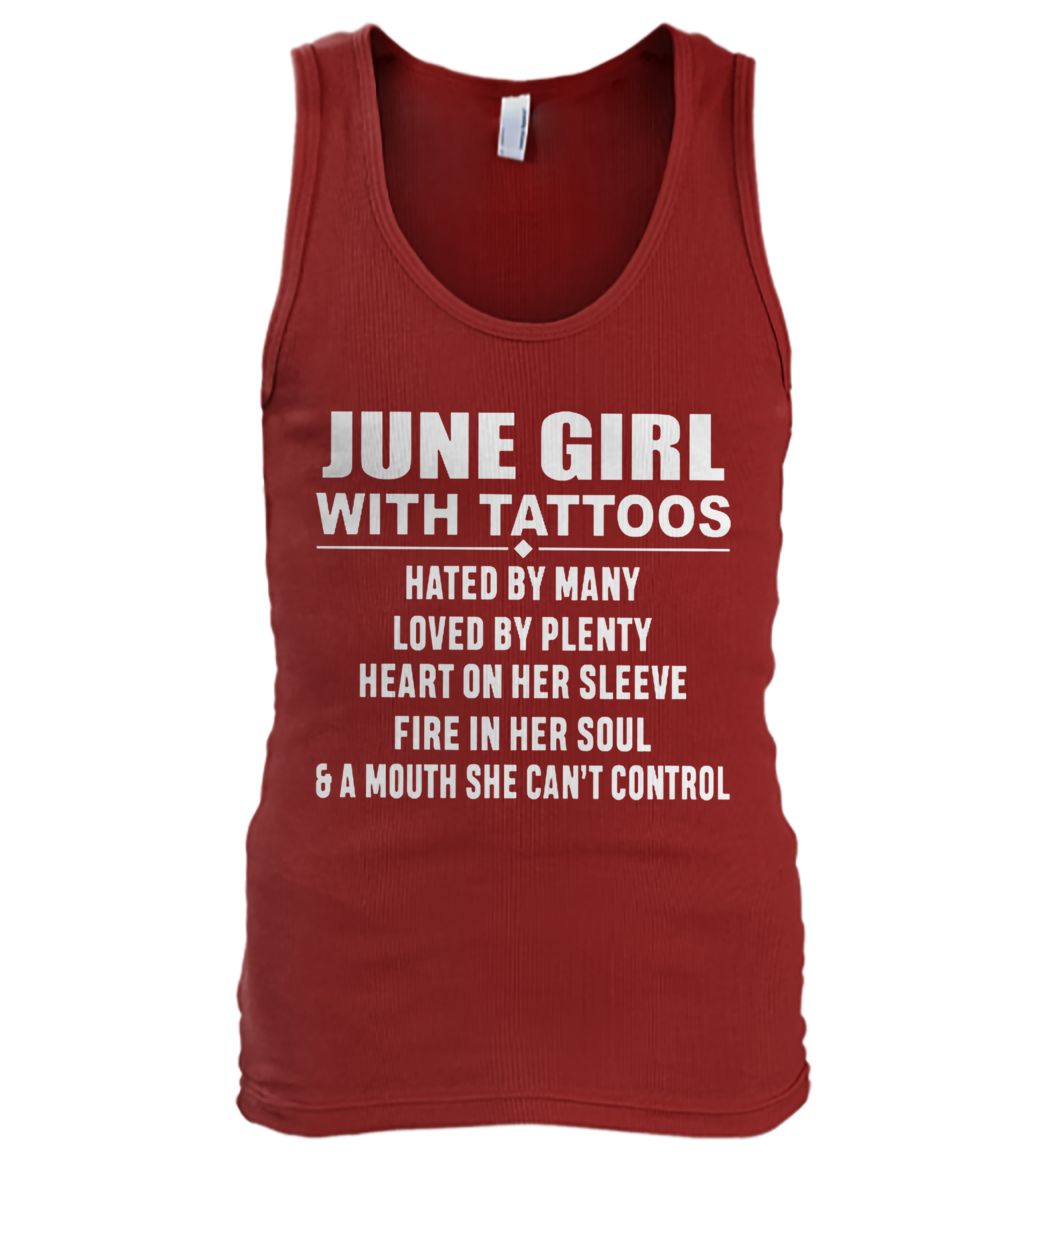 June girl with tattoos hated by many loved by plenty heart on her sleeve men's tank top